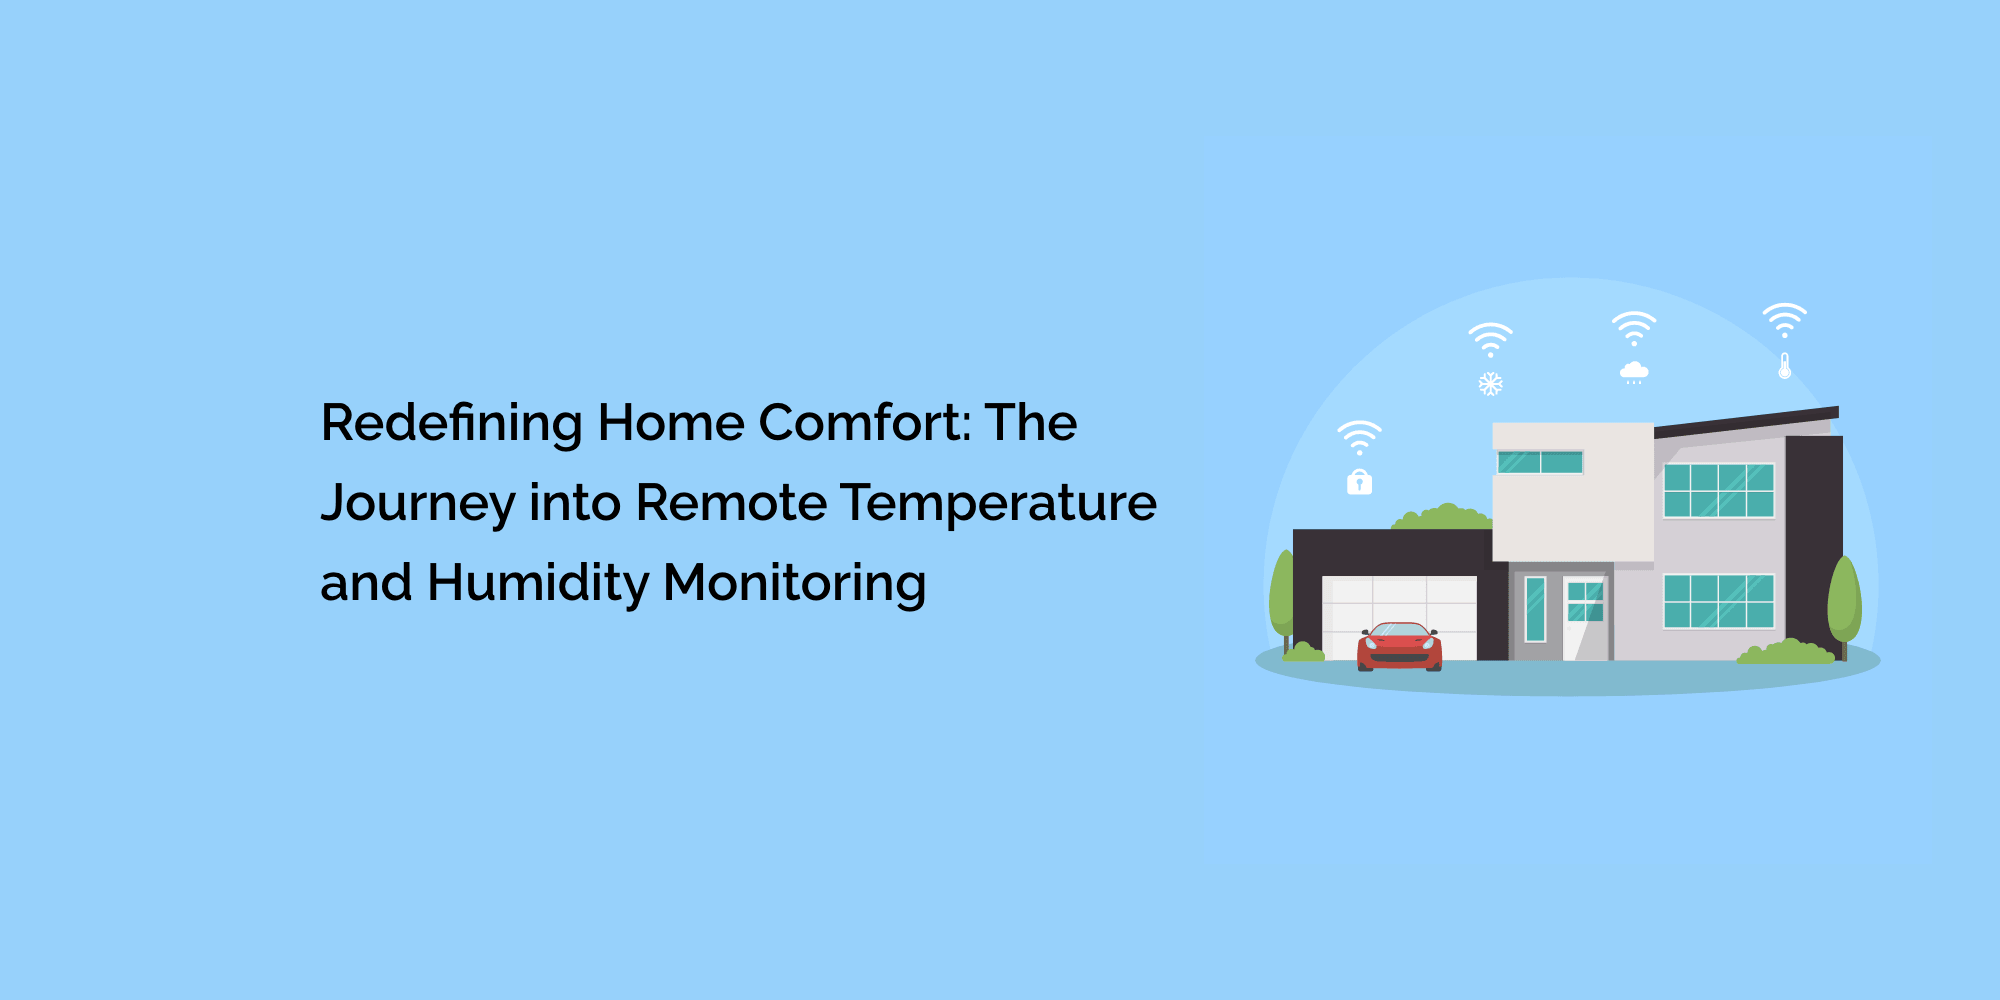 Redefining Home Comfort: The Journey into Remote Temperature and Humidity Monitoring